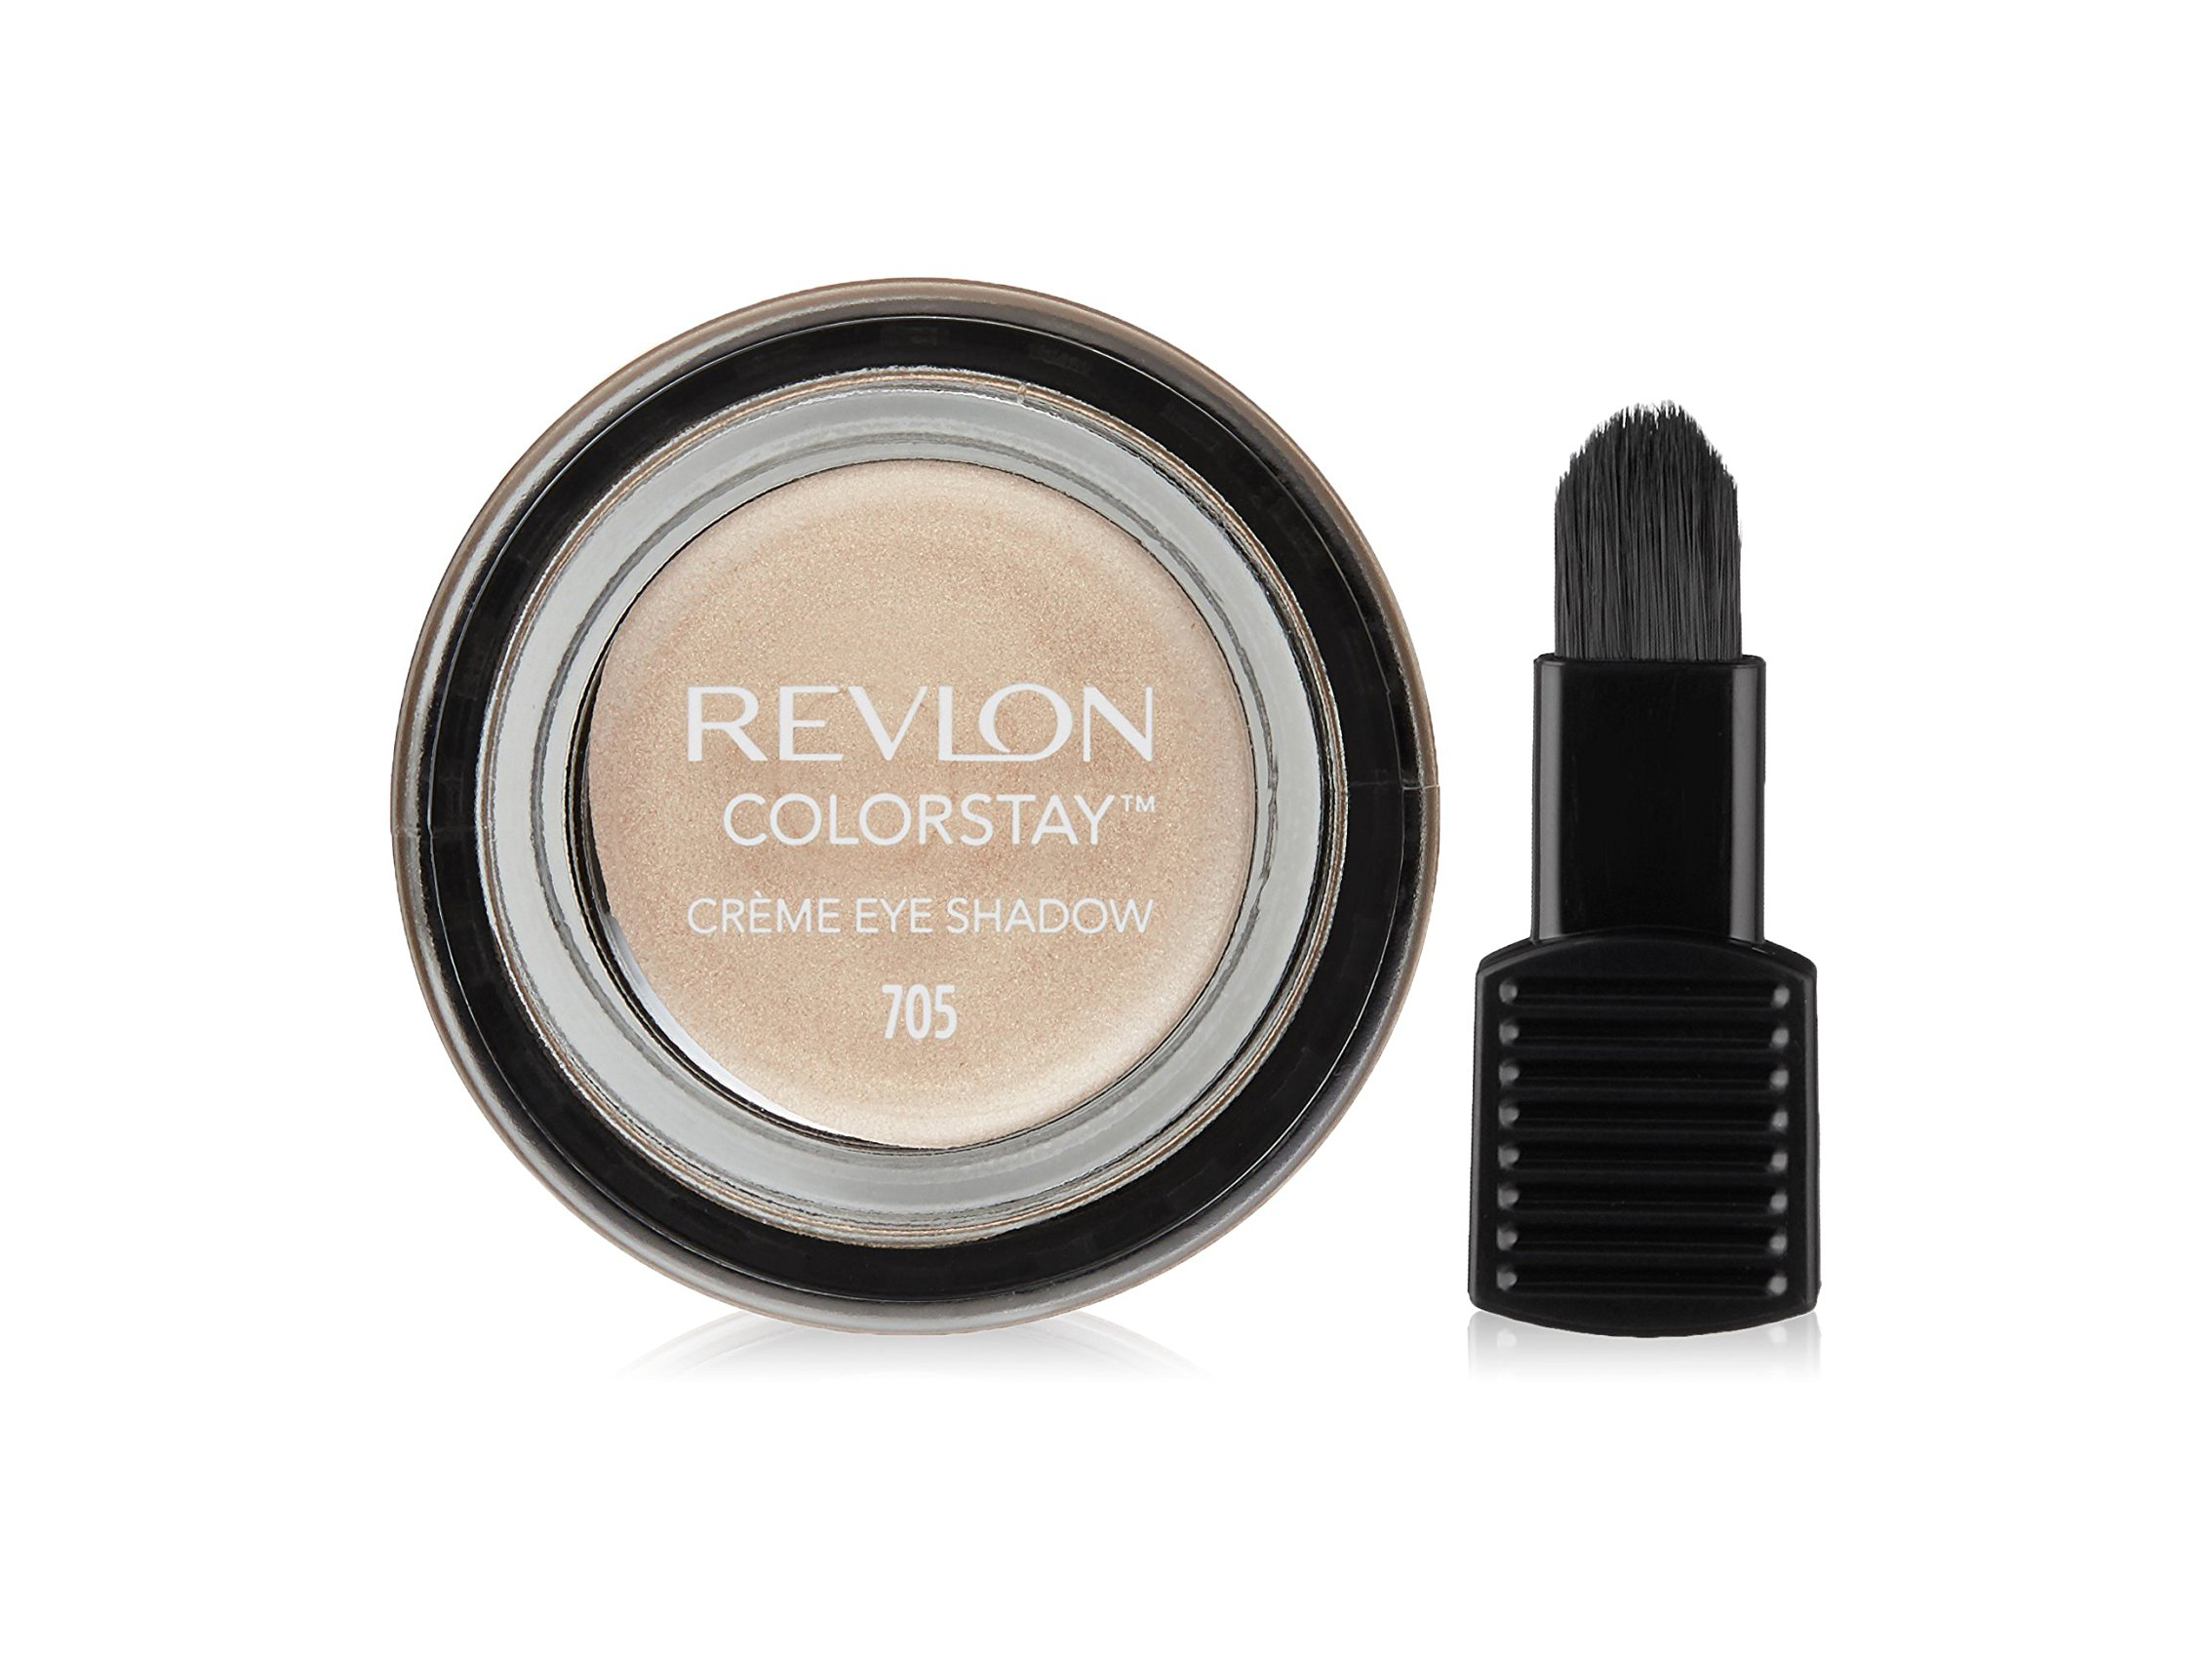 Revlon Colorstay Creme Eye Shadow Ombretto Colore 705 Creme Brulee